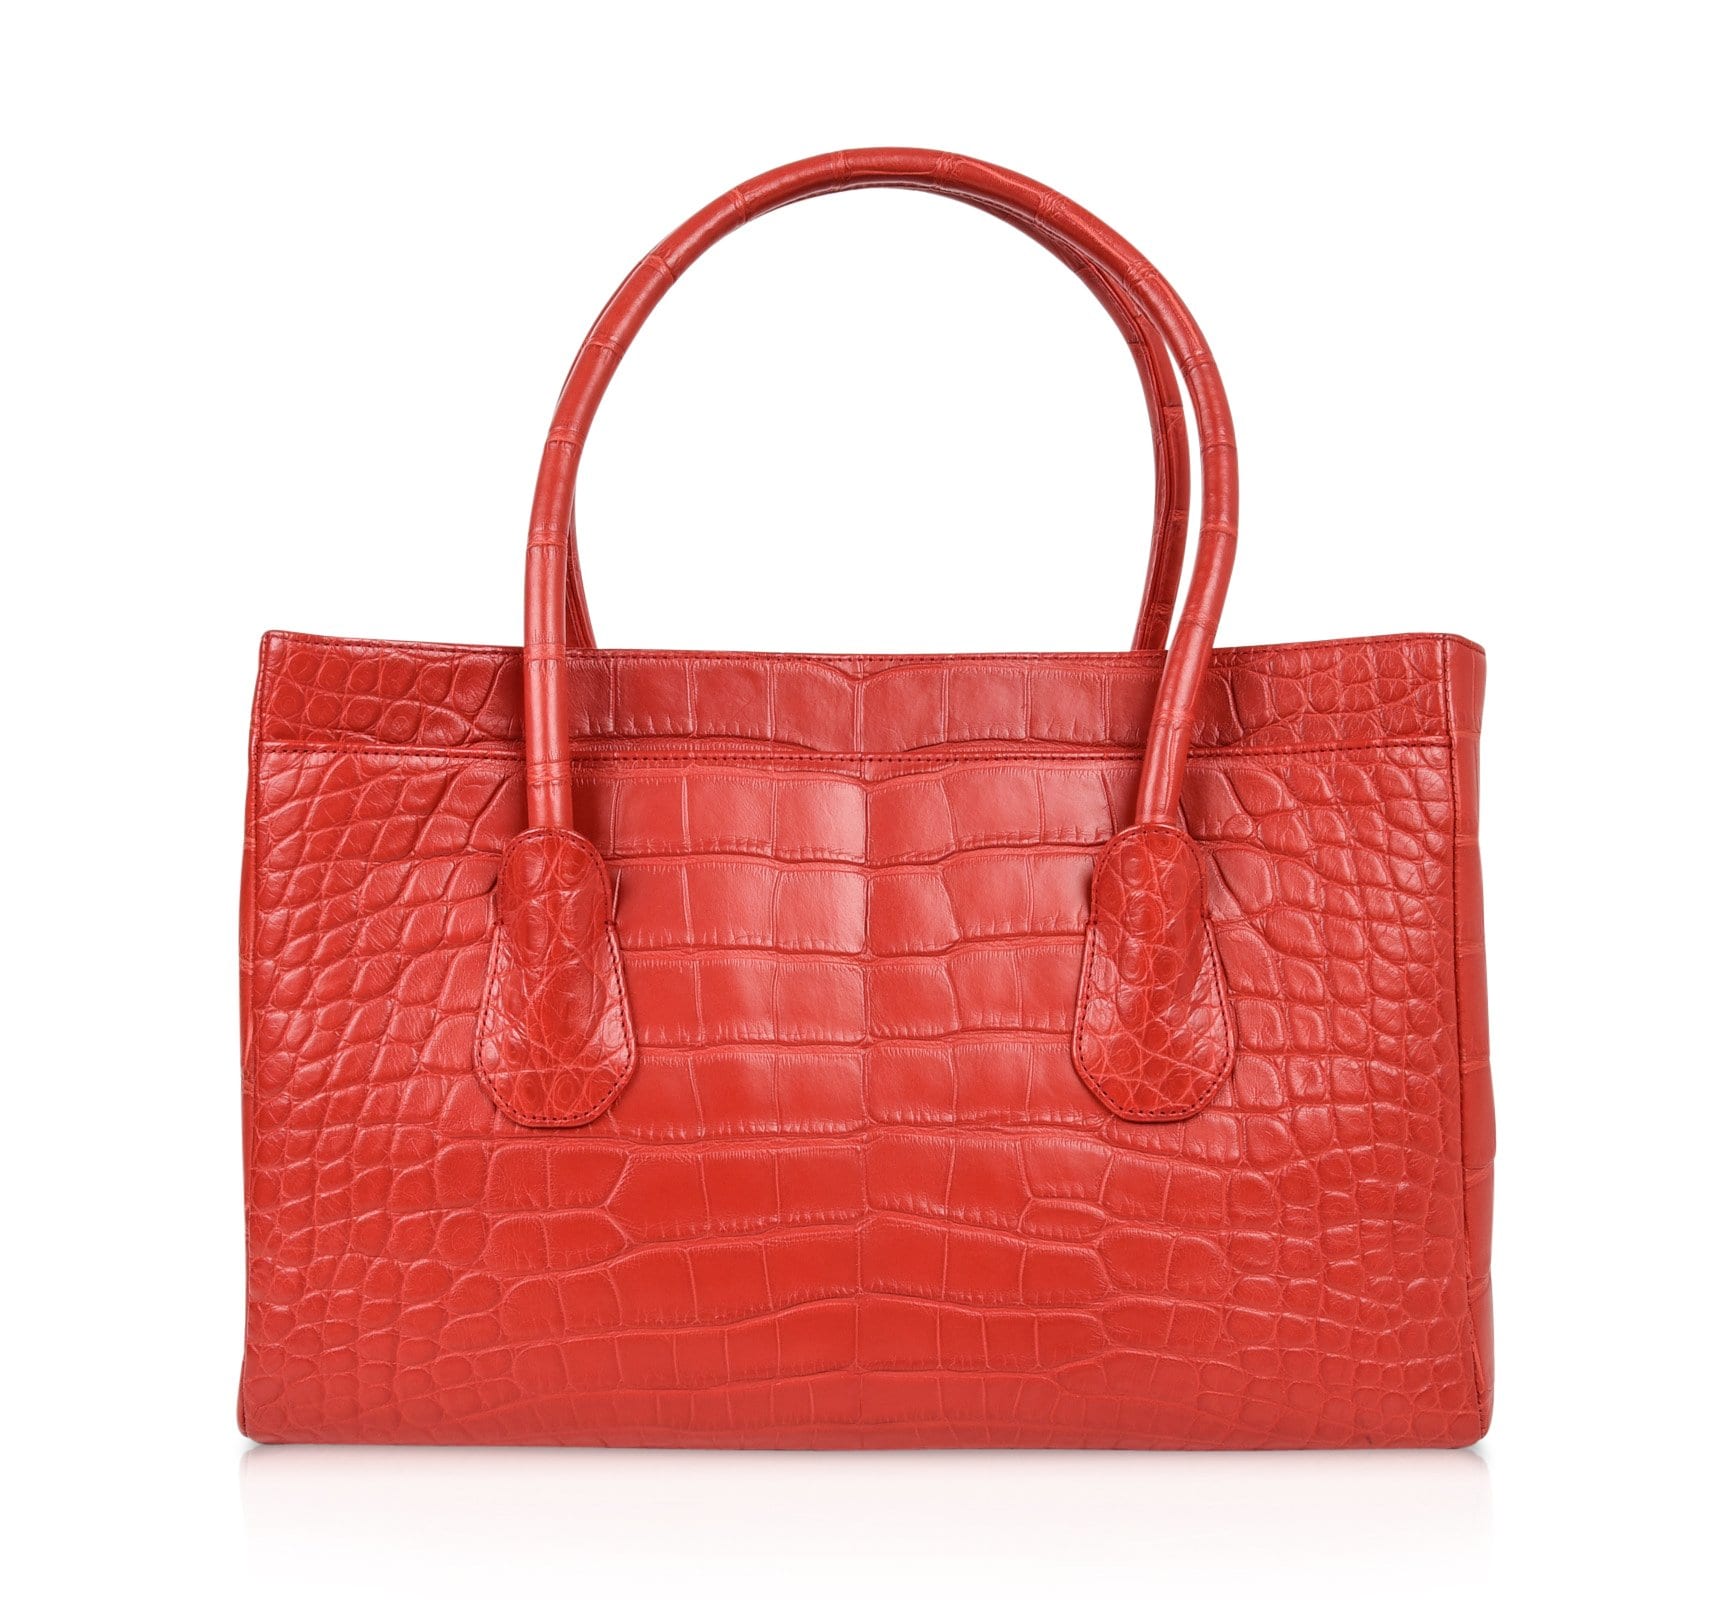 Chanel's Gabrielle Croc-Embossed Bag With Signature Strap